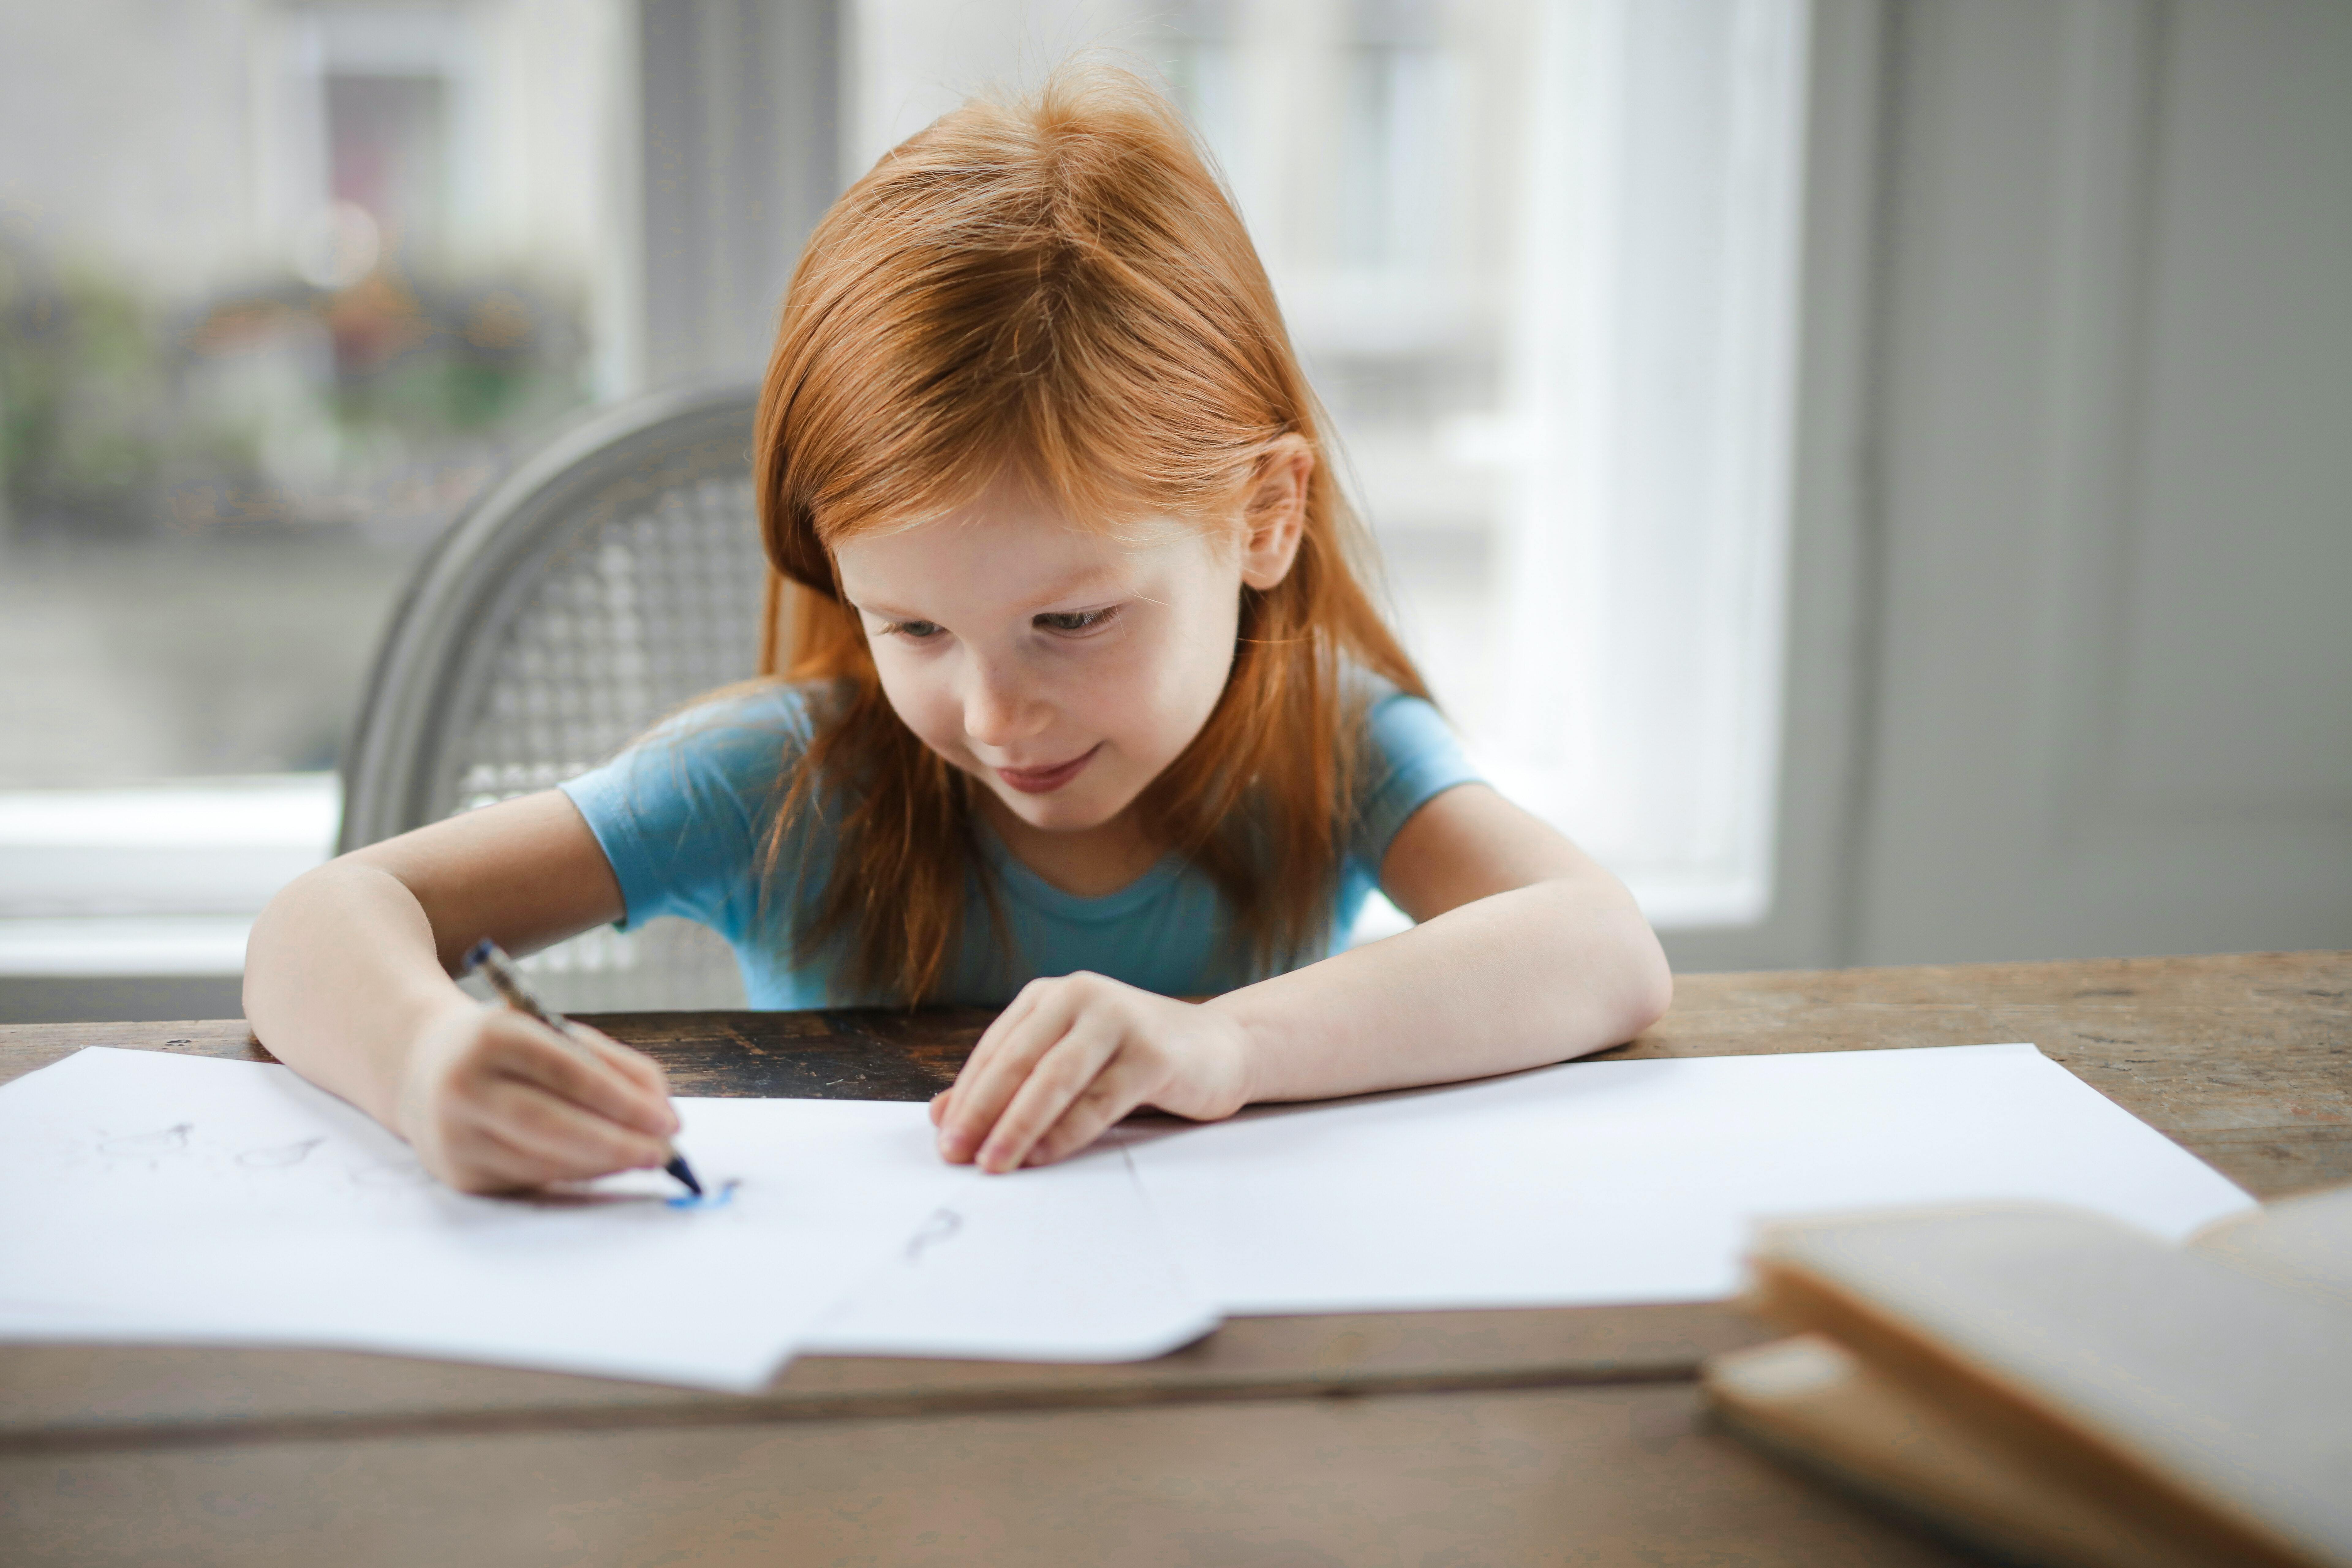 girl sitting at table in front of open notebooks